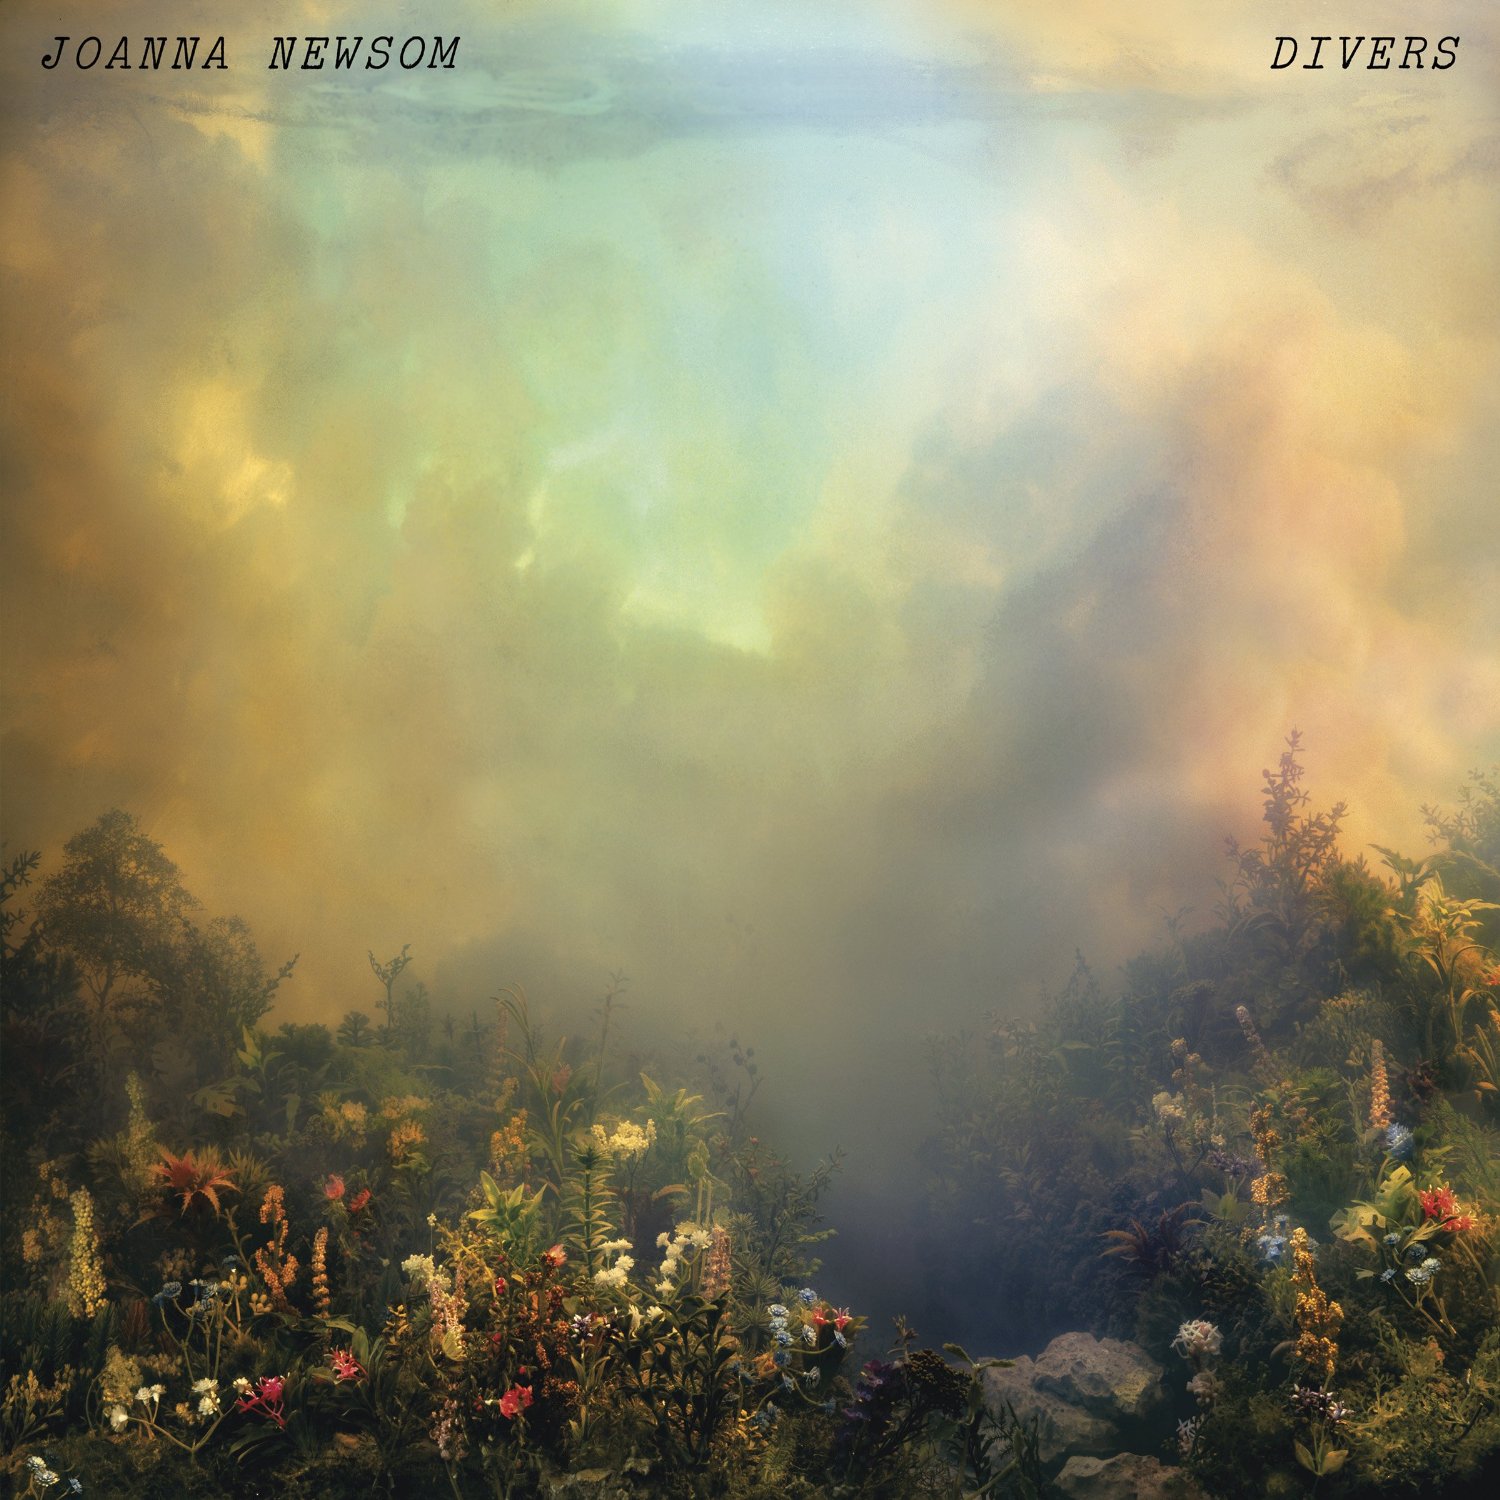 cover of the album Divers by Joanna Newsom